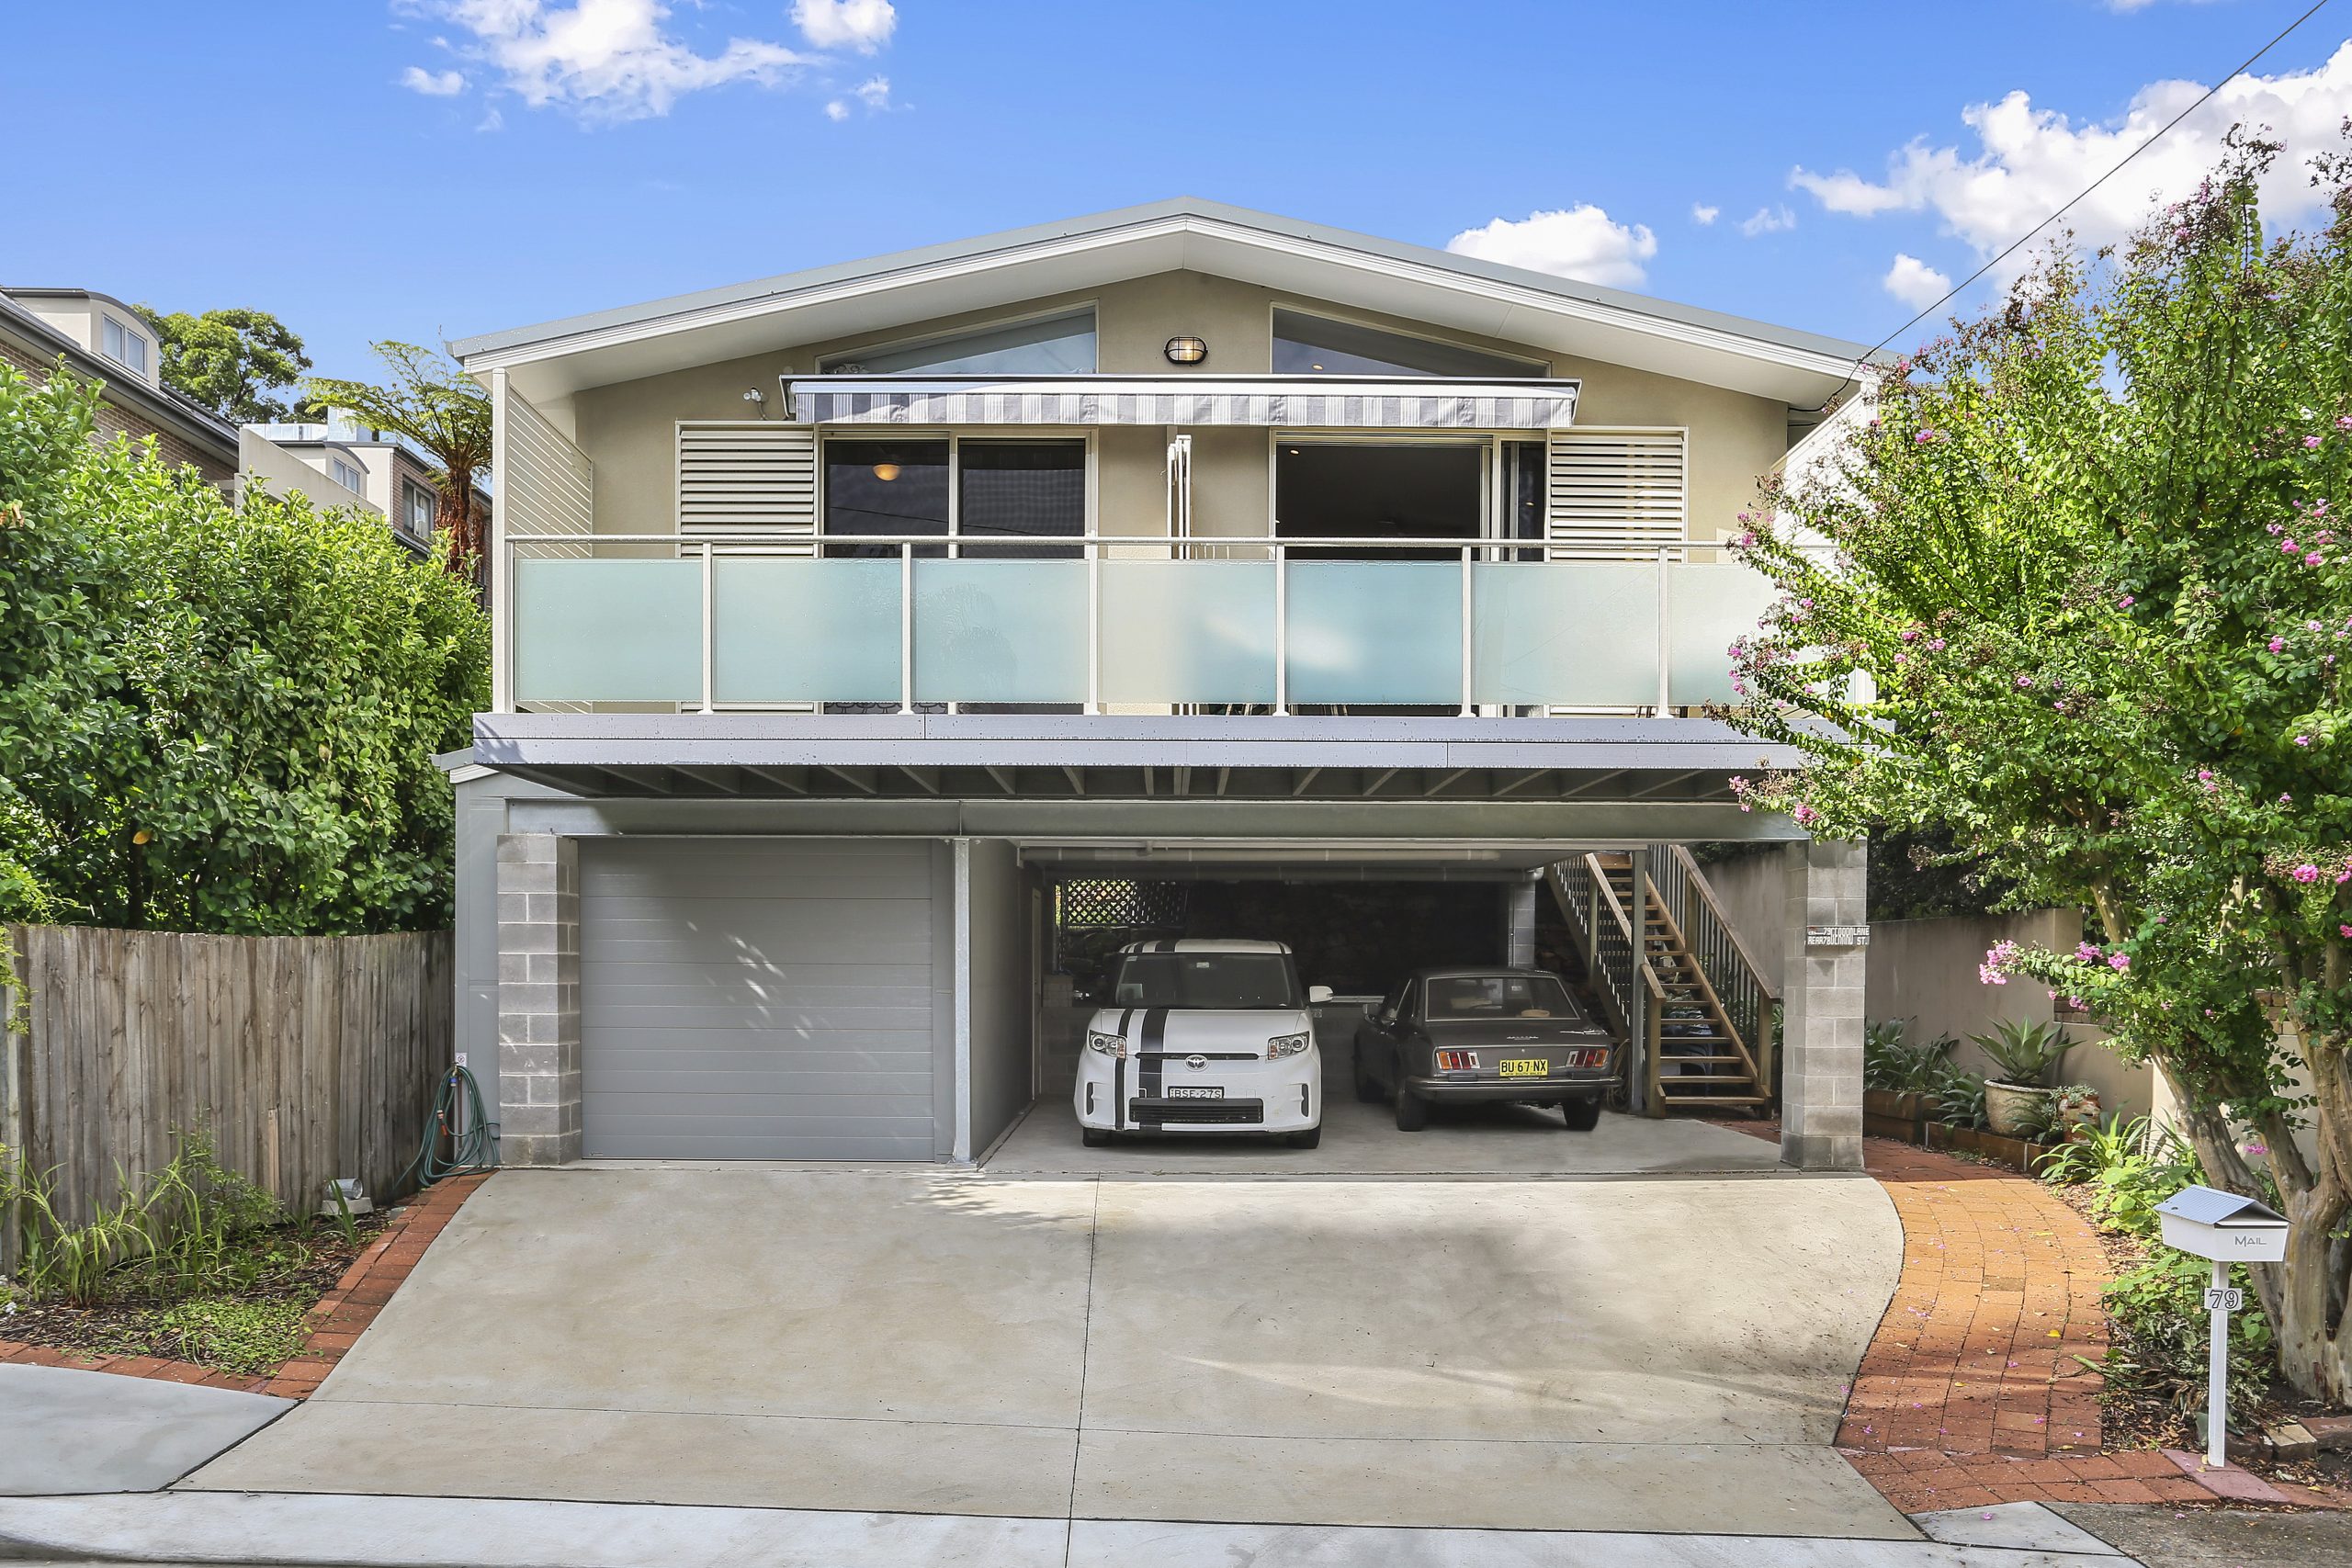 Two Storey Granny Flats—Are They Worth the Money?